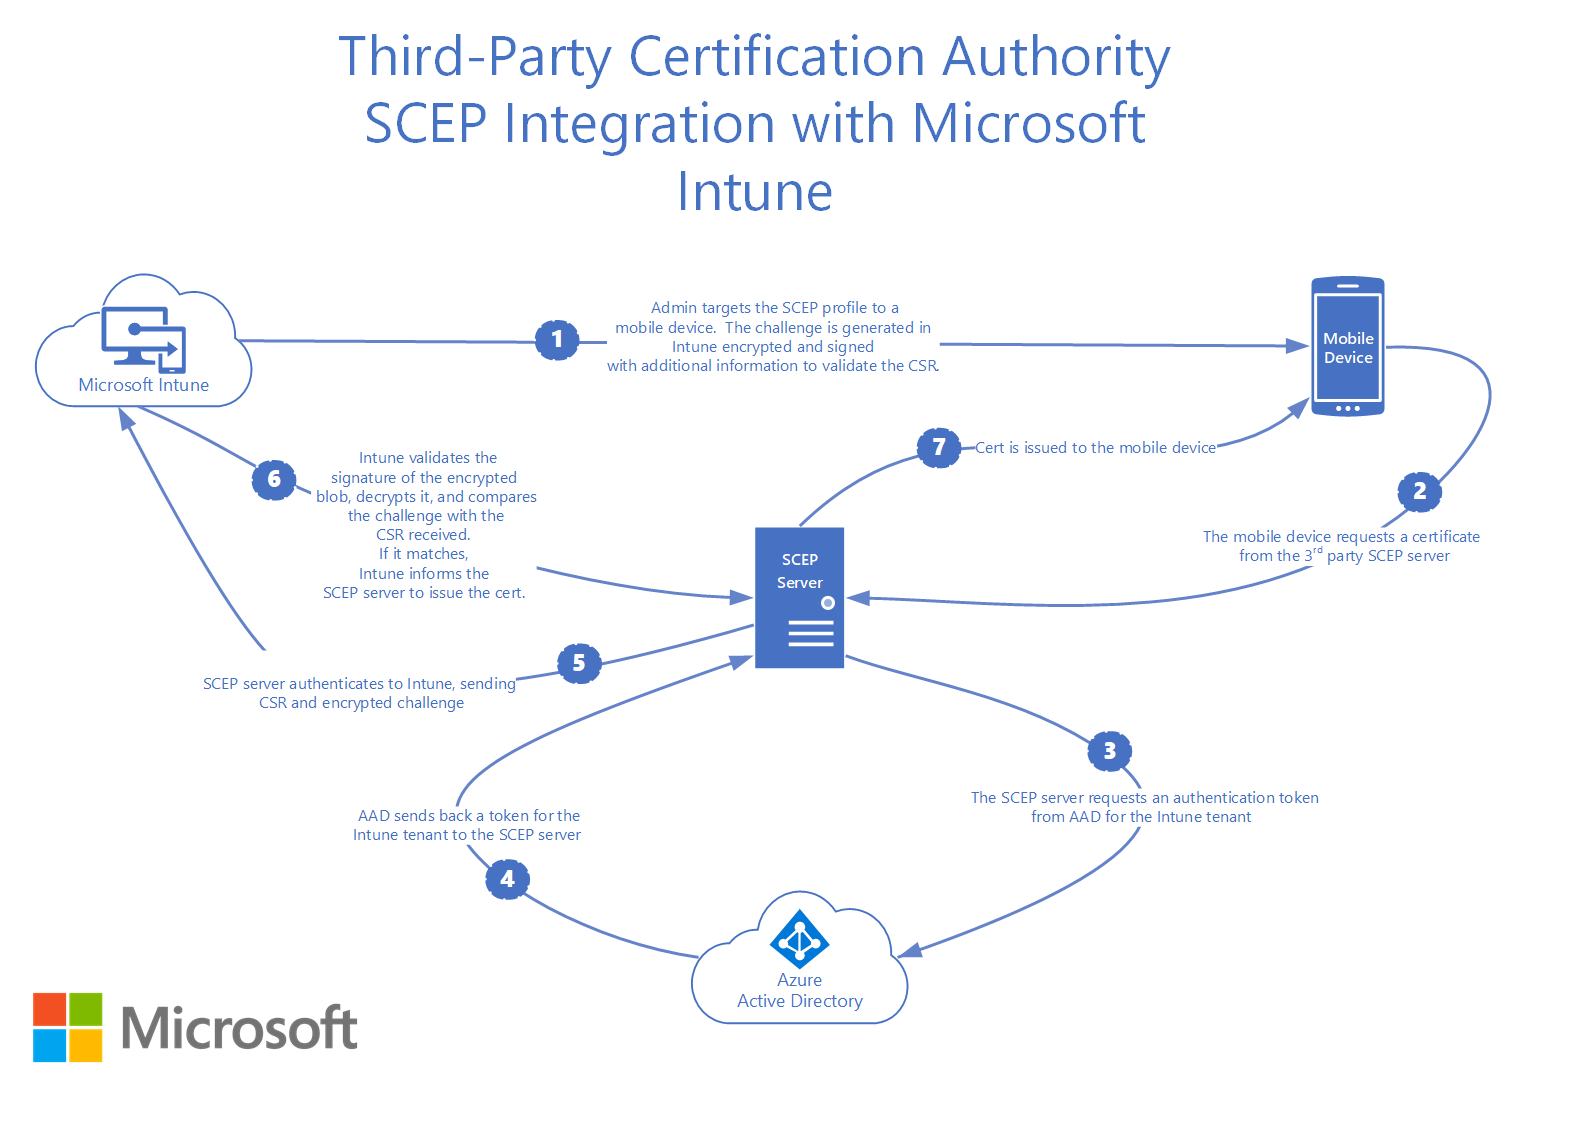 How third-party certification authority SCEP integrates with Microsoft Intune